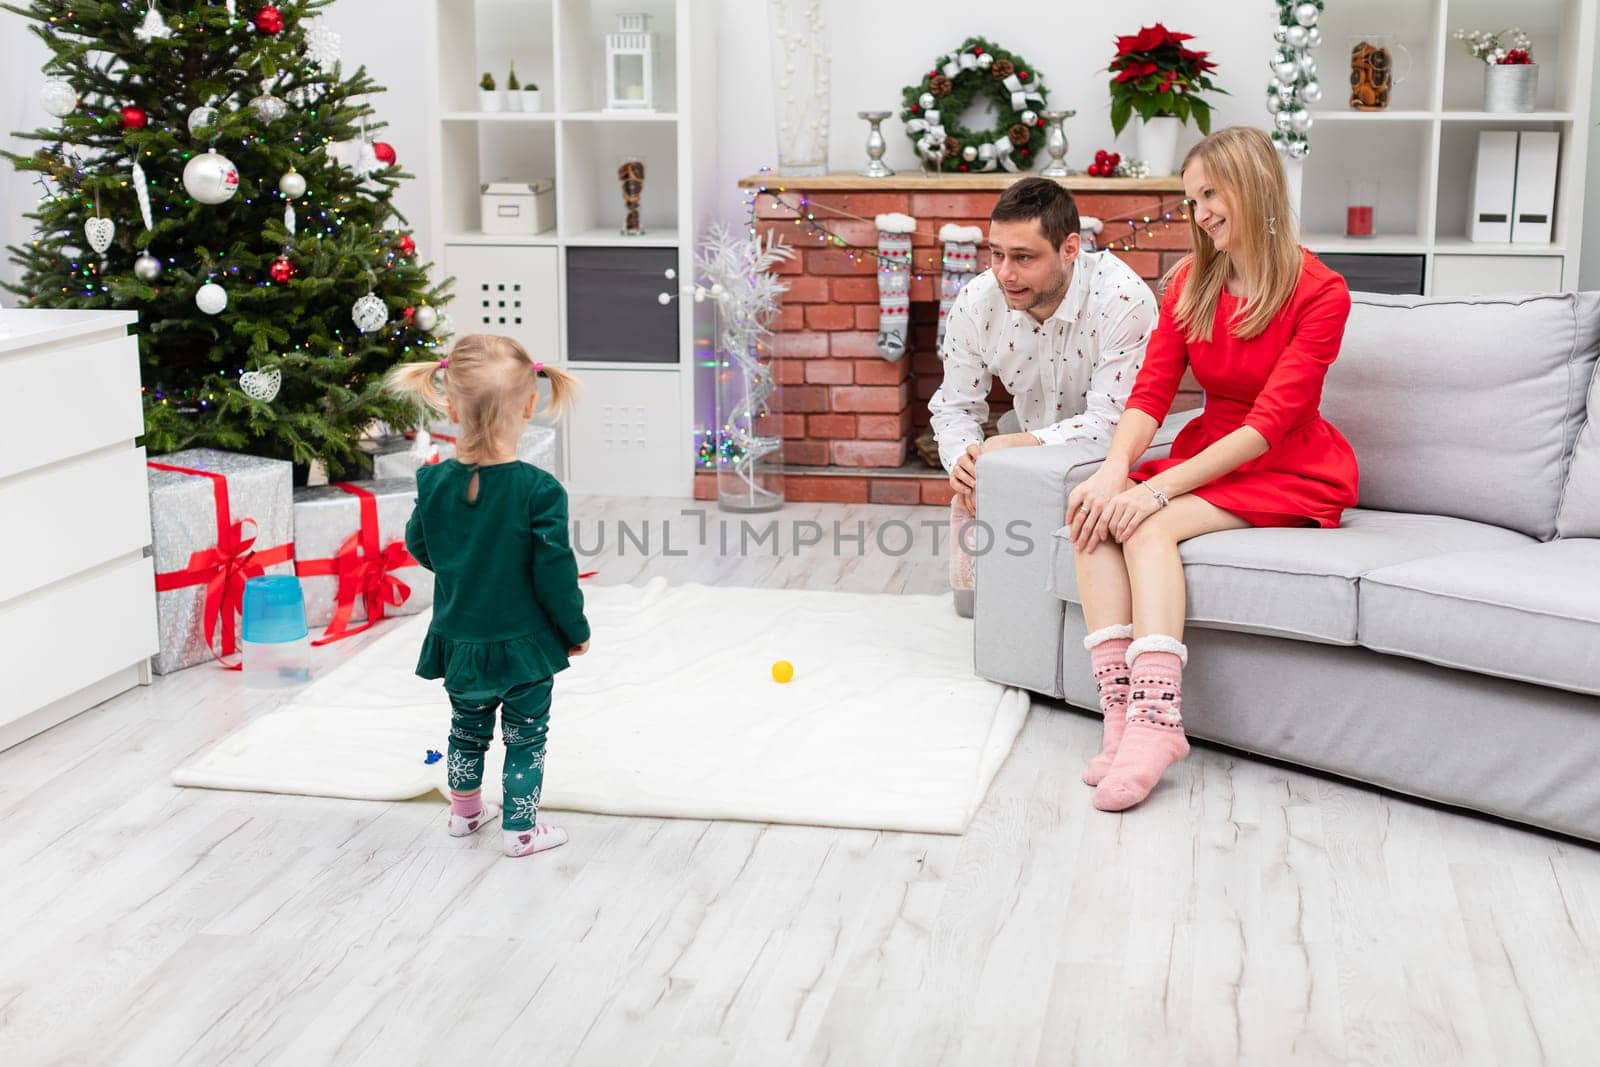 In the foreground a little girl standing with her back. Next to it, a man and a woman are looking at the little girl. The parents and daughter are in a room decorated with Christmas decorations.